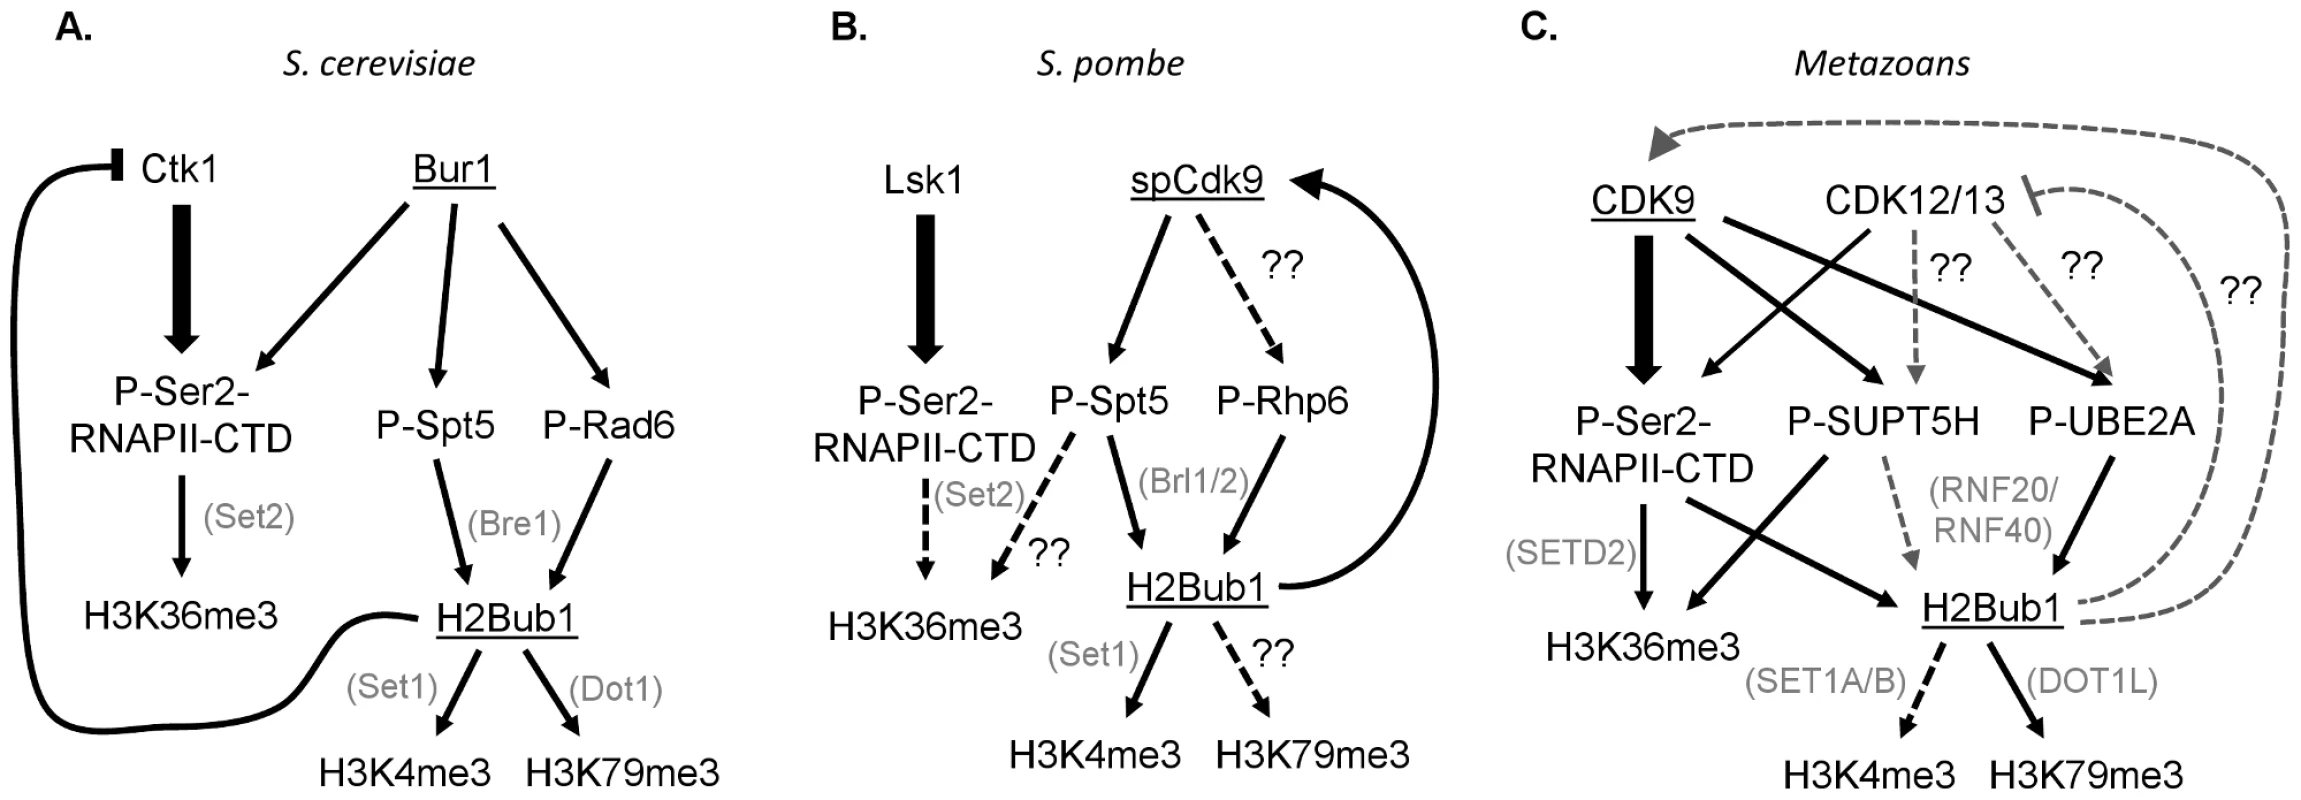 Interconnections between CDK9 orthologs, their substrates, and downstream histone modifications in yeast and humans.